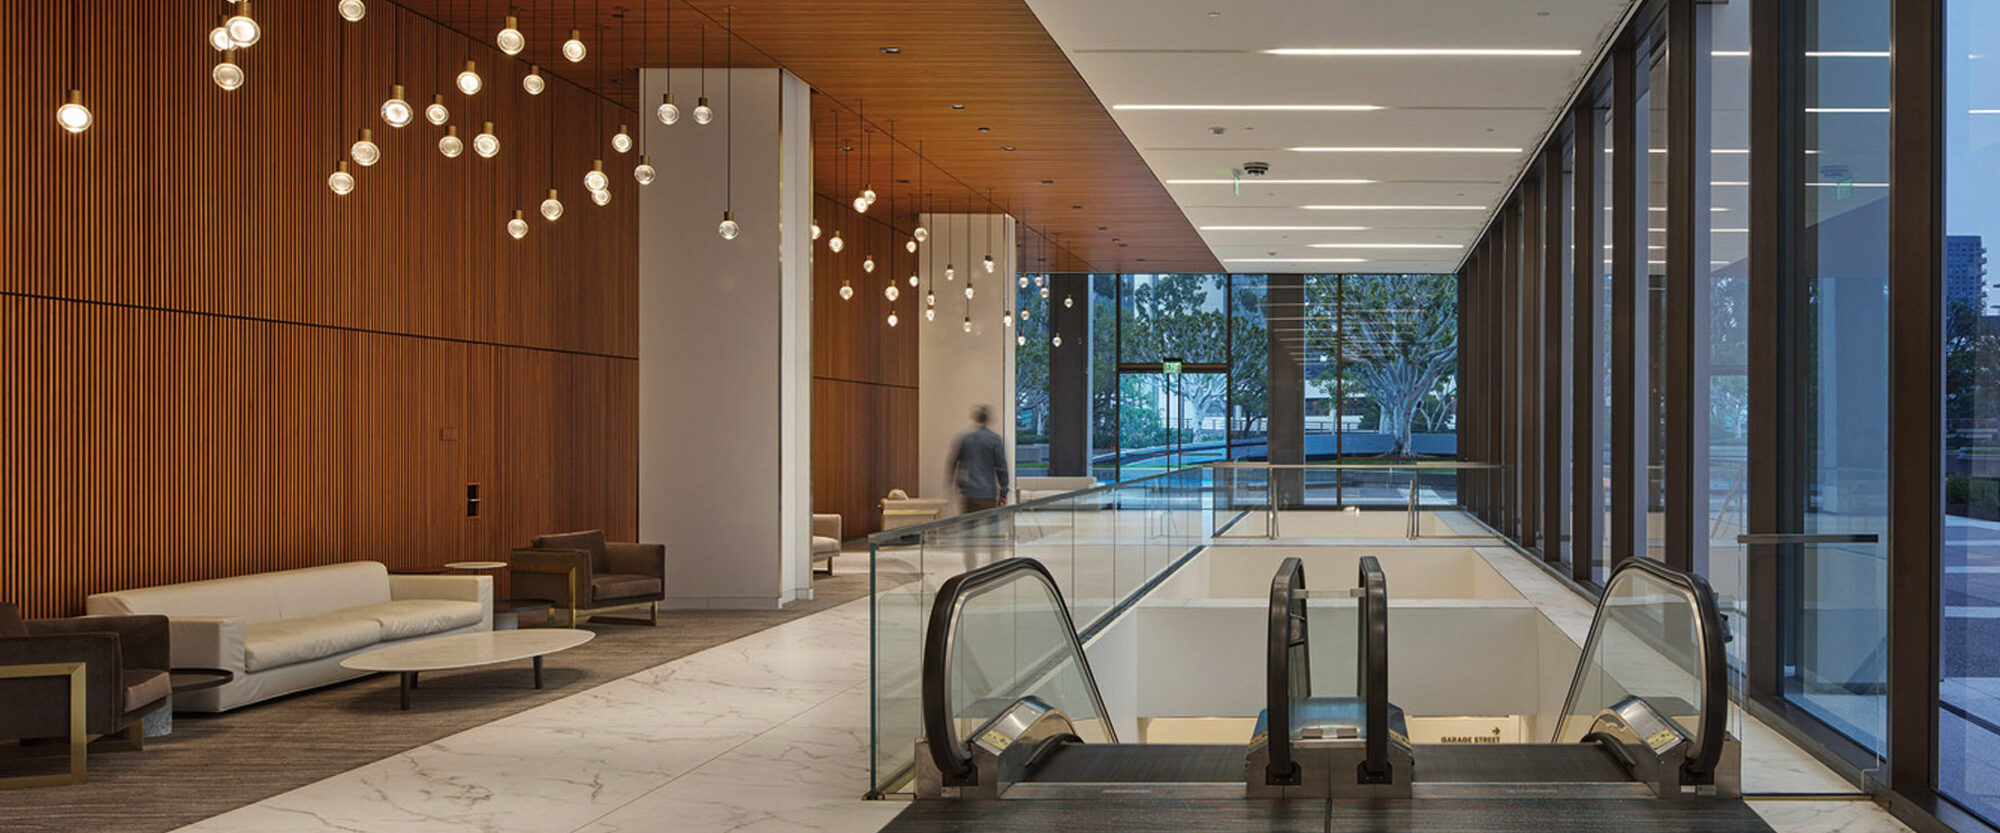 Modern commercial lobby featuring warm wood panel ceiling, recessed lighting, and clusters of unique filament pendant lights. White benches complement the marble flooring, while expansive windows afford a view of the urban setting outside.